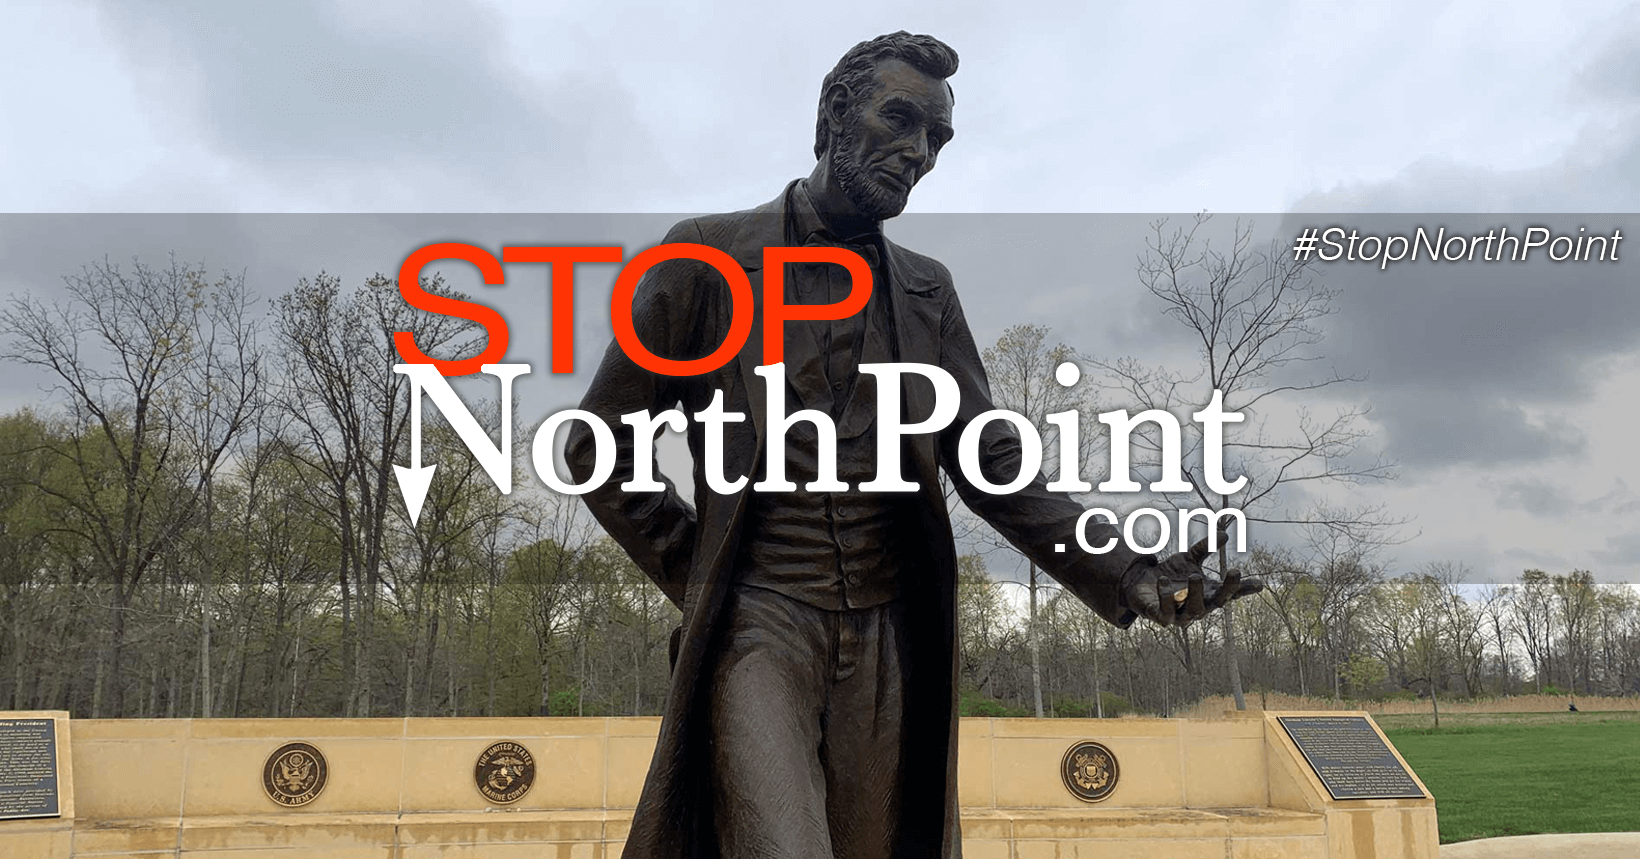 StopNorthPoint.com